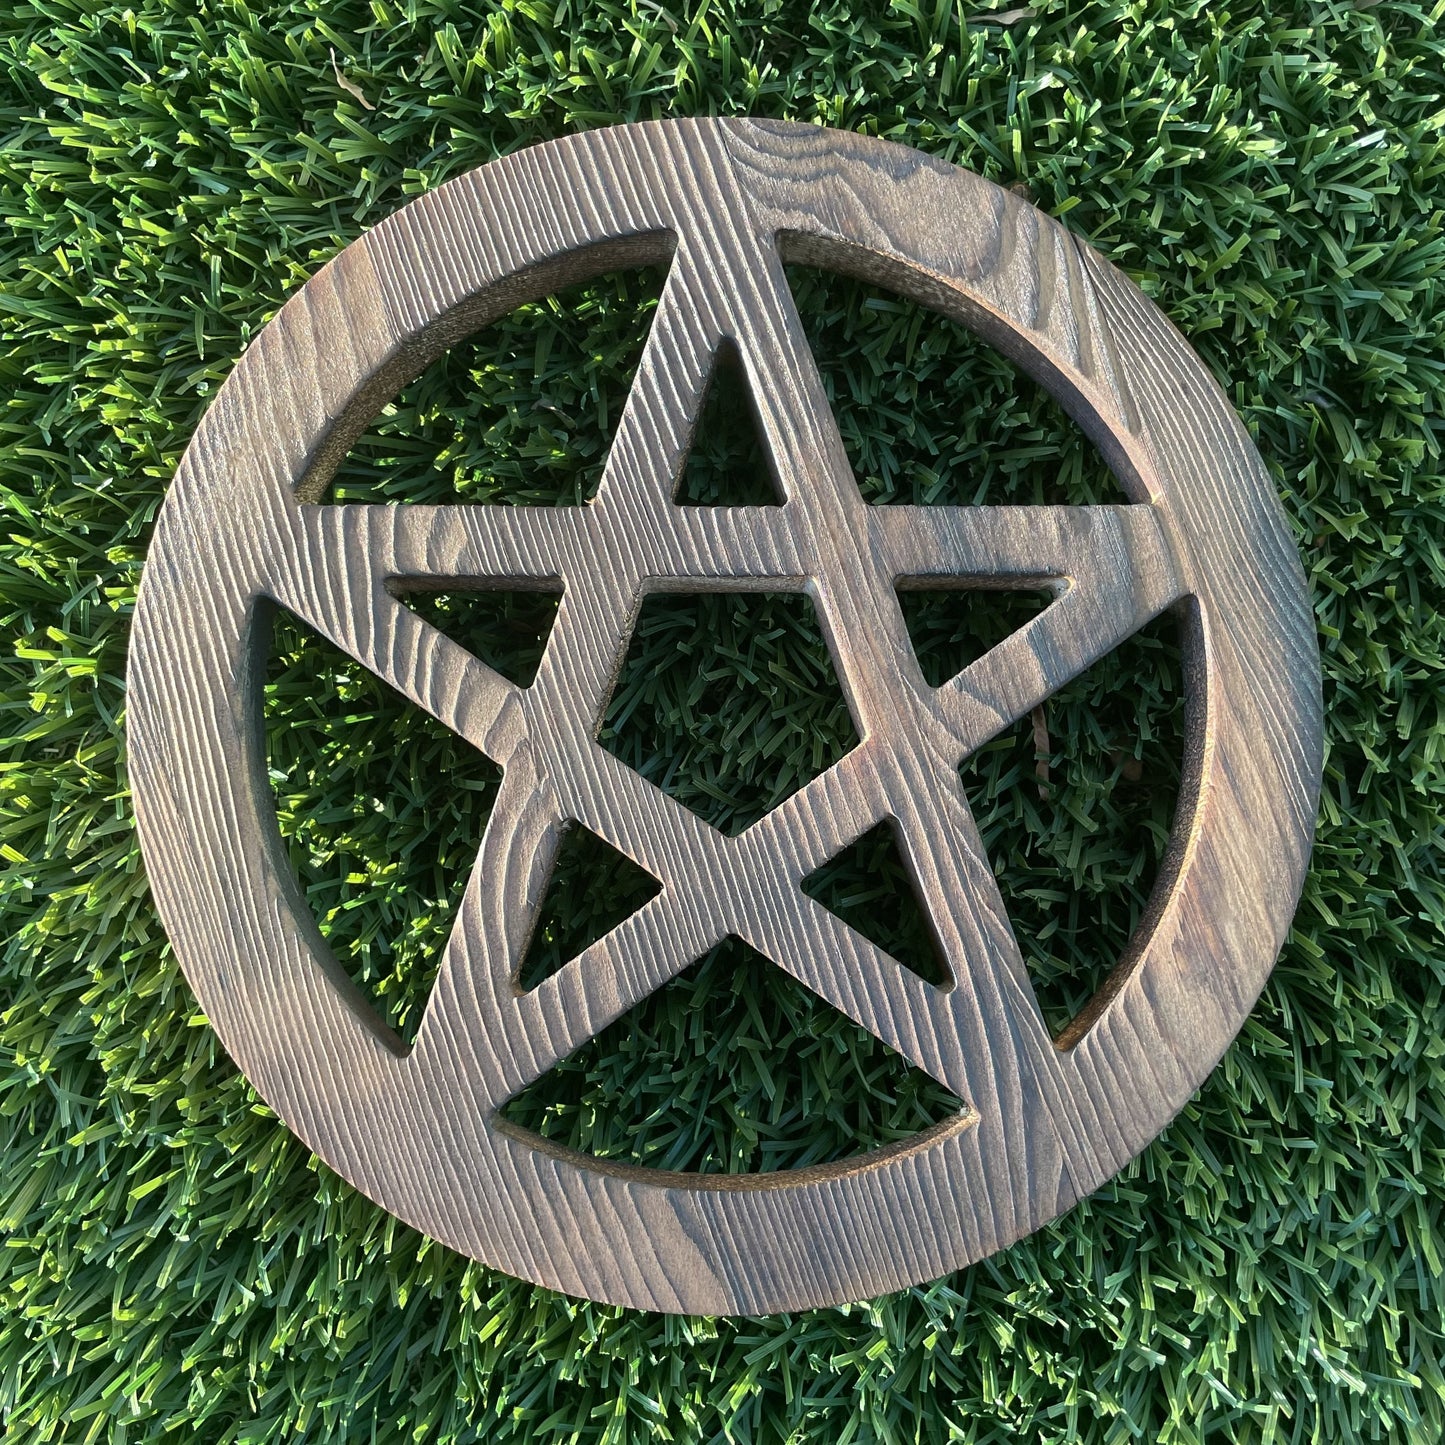 Stained Wood Five Pointed Star Pentagram